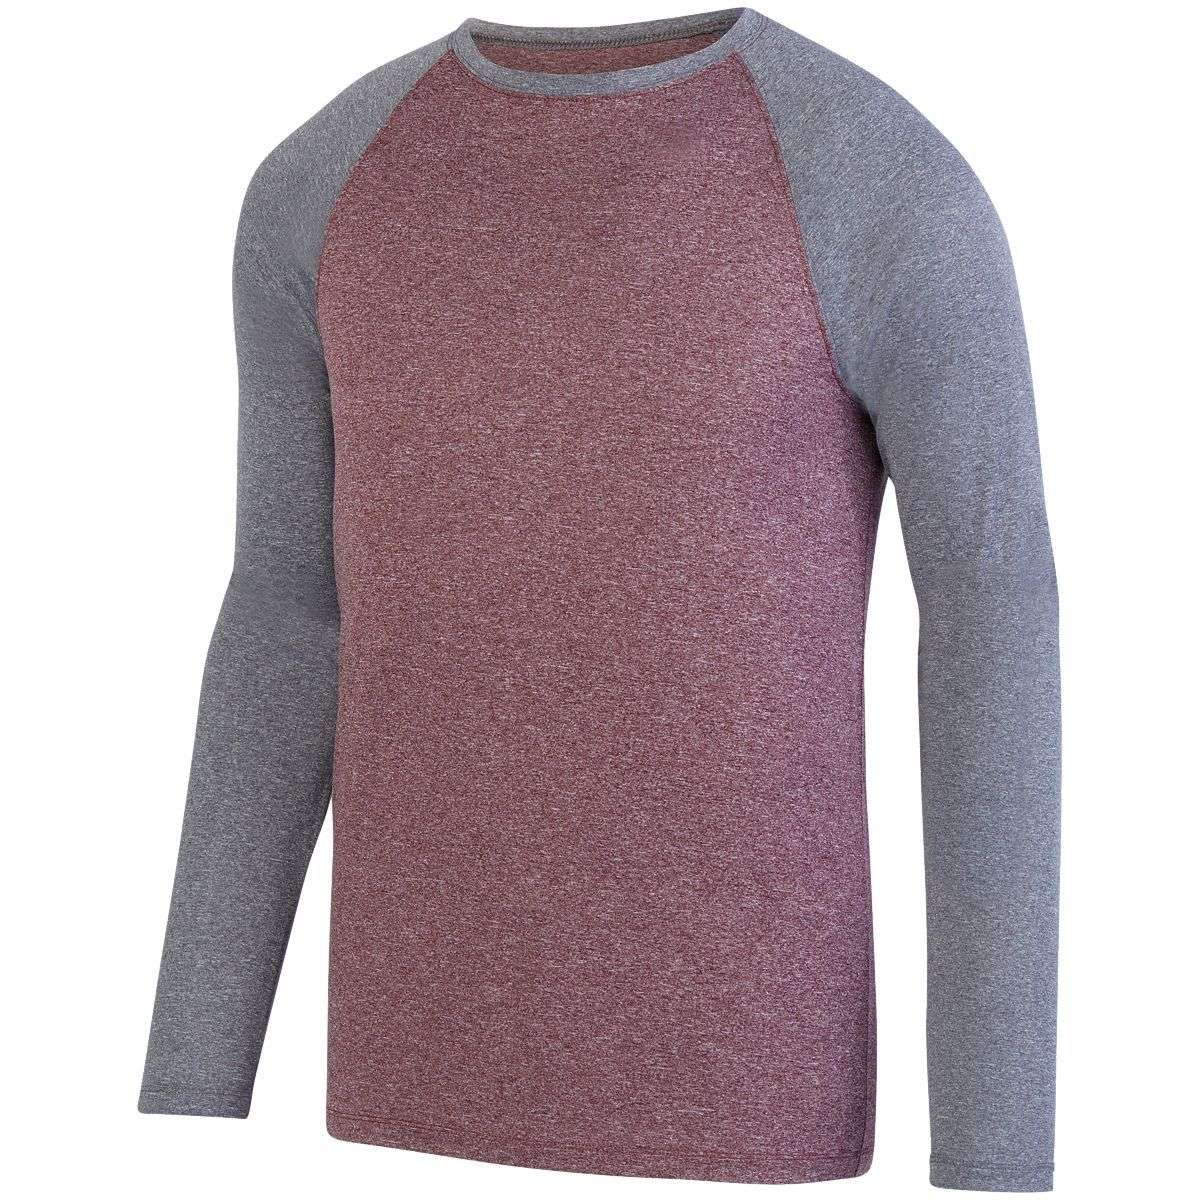 Selected Color is Maroon Heather/Graphite Heather